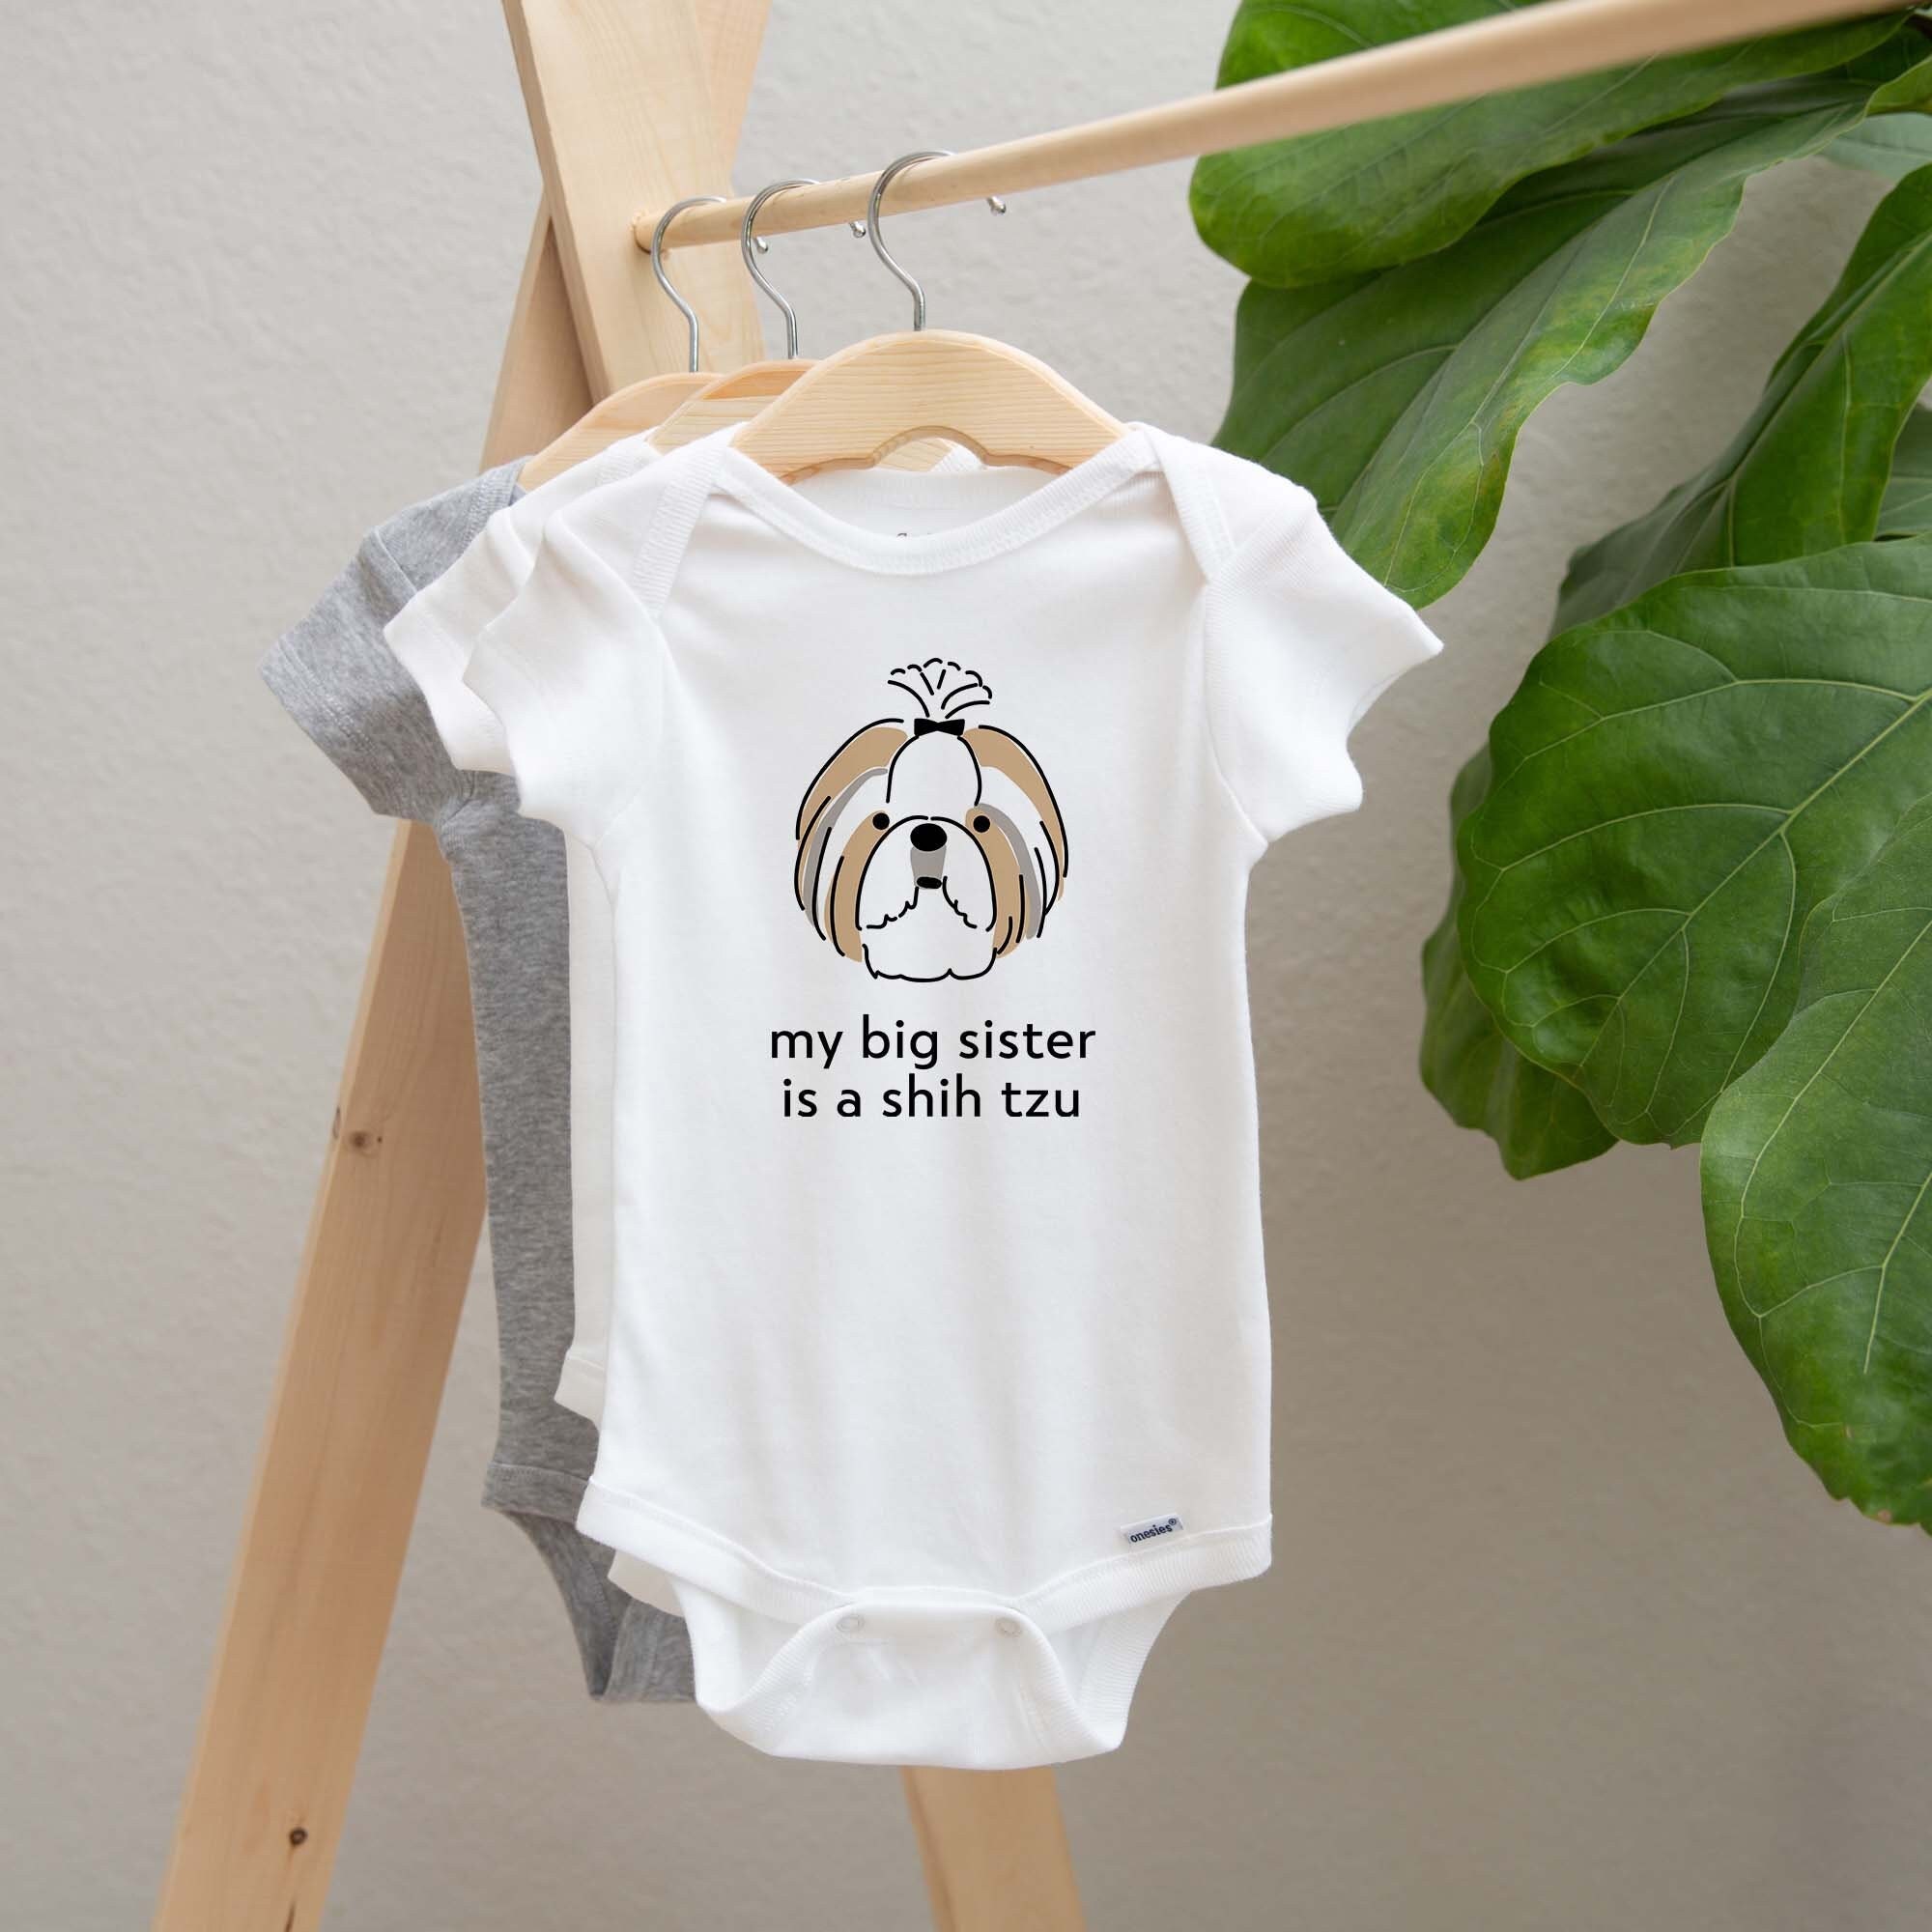 Buy Shih Tzu Baby Onesie®, New Born Baby Clothes, Baby Shower Gift, Cute  Dog Baby Bodysuit, Gift for New Baby Online in India 